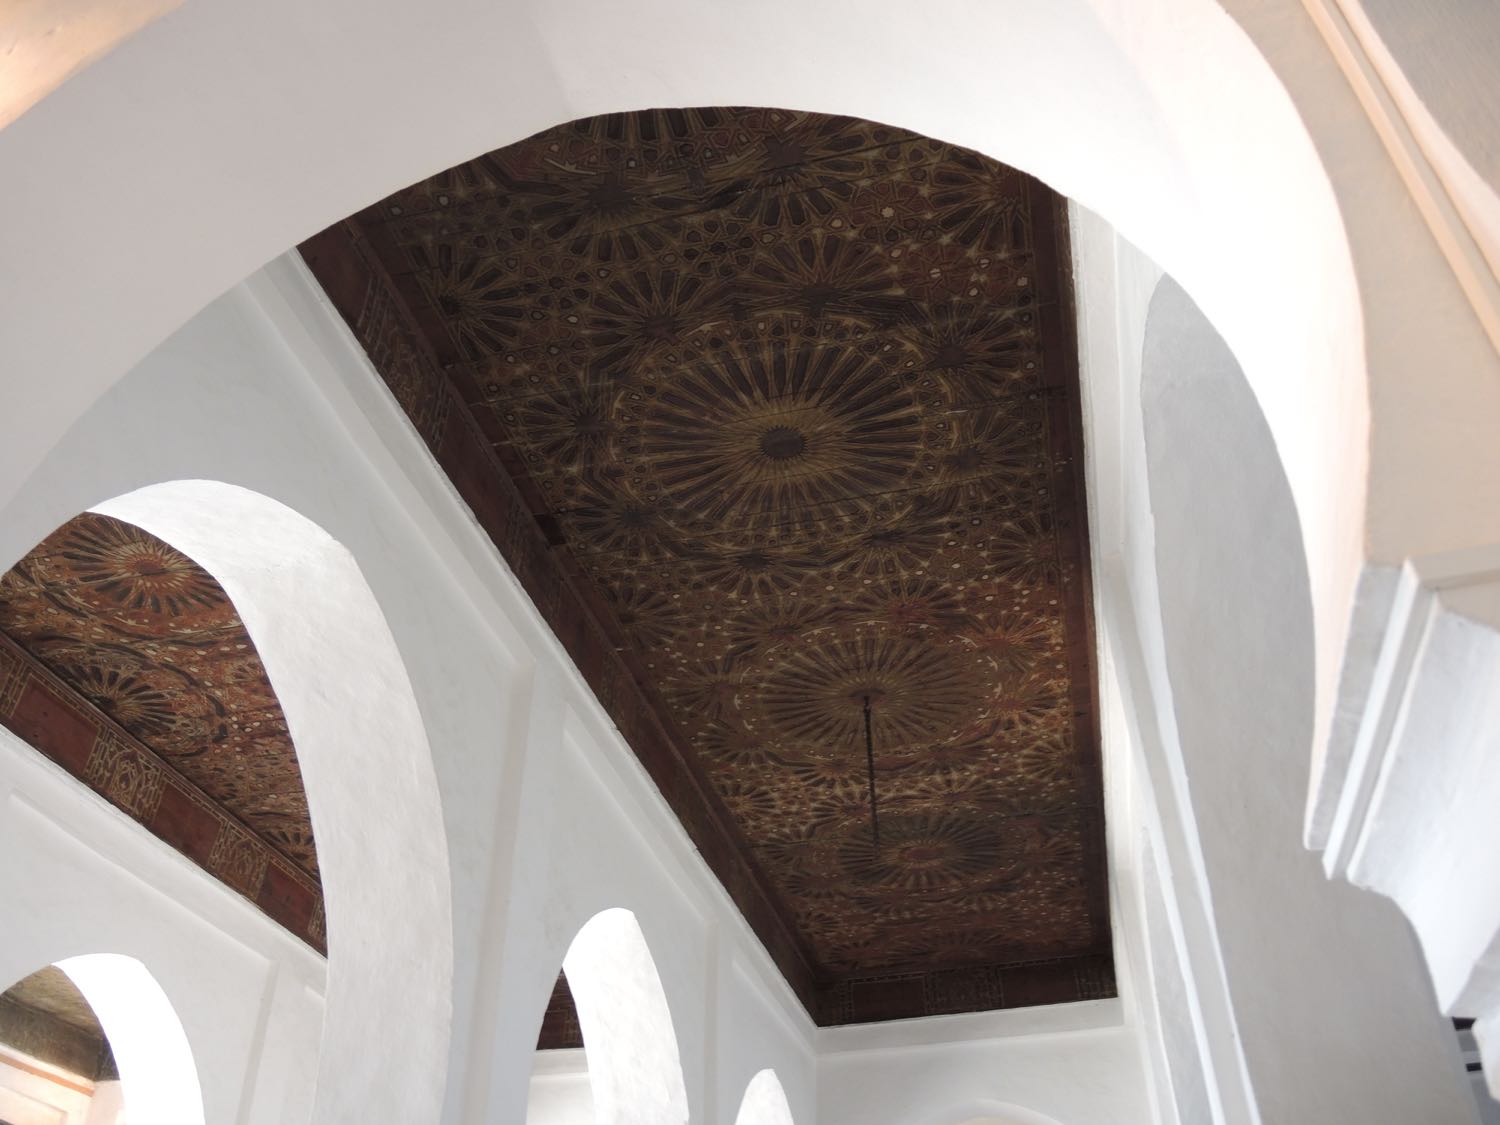 View of the painted ceiling of the portico